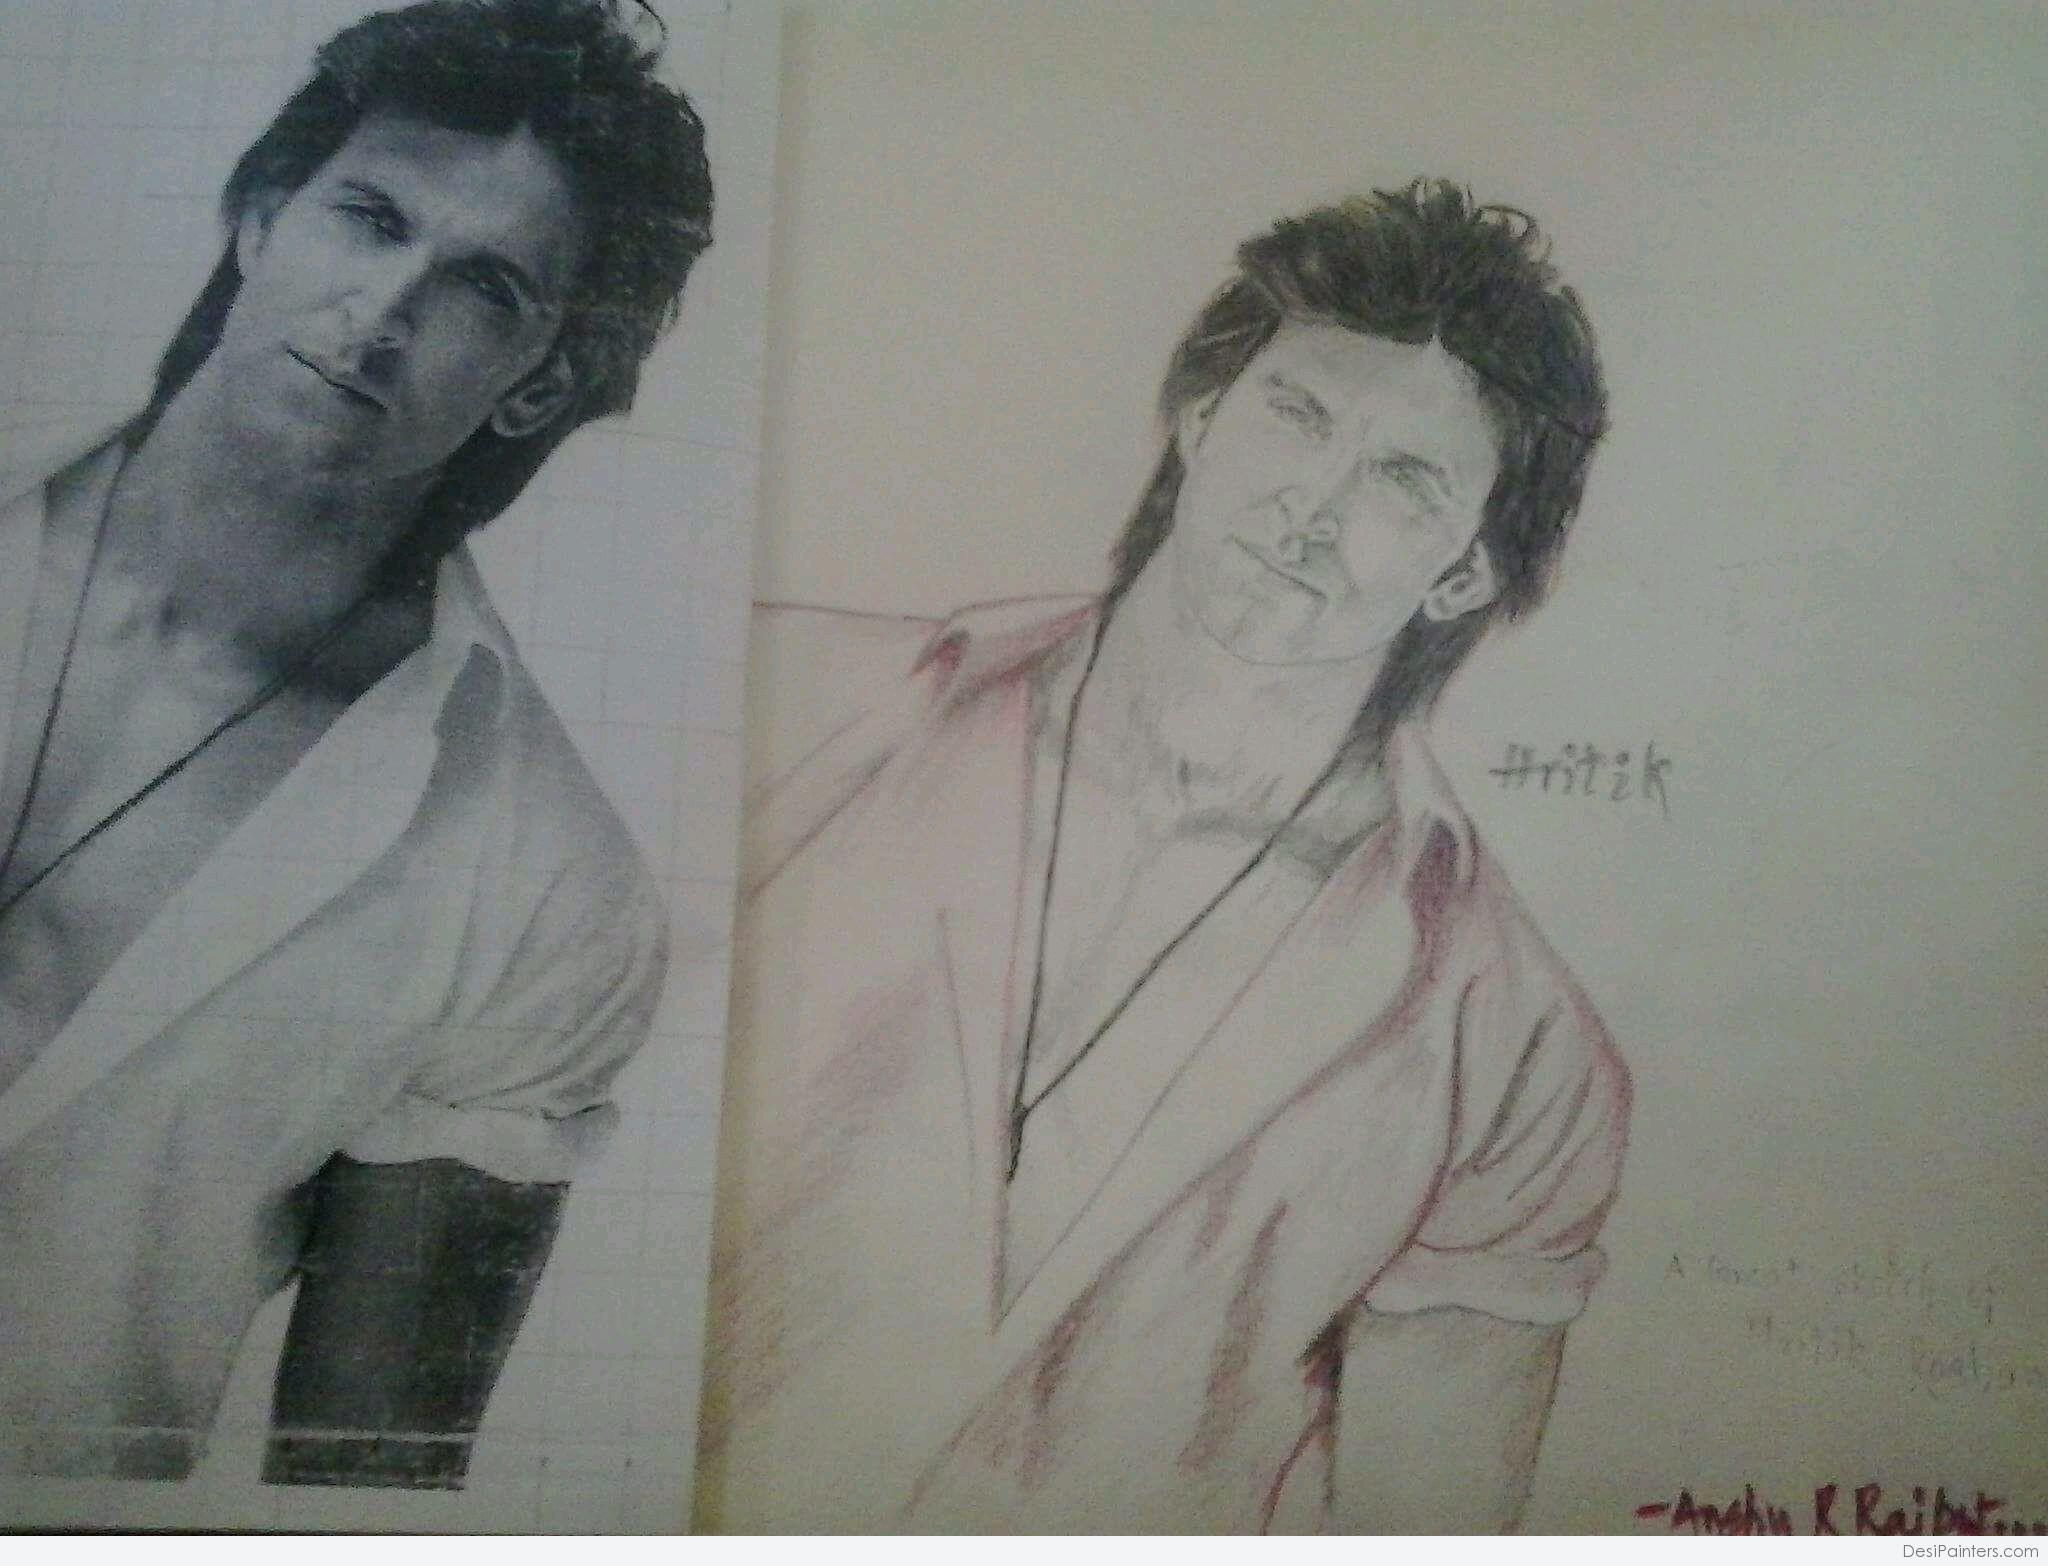 A pencil drawing I did of Hrithik Roshan : r/drawing